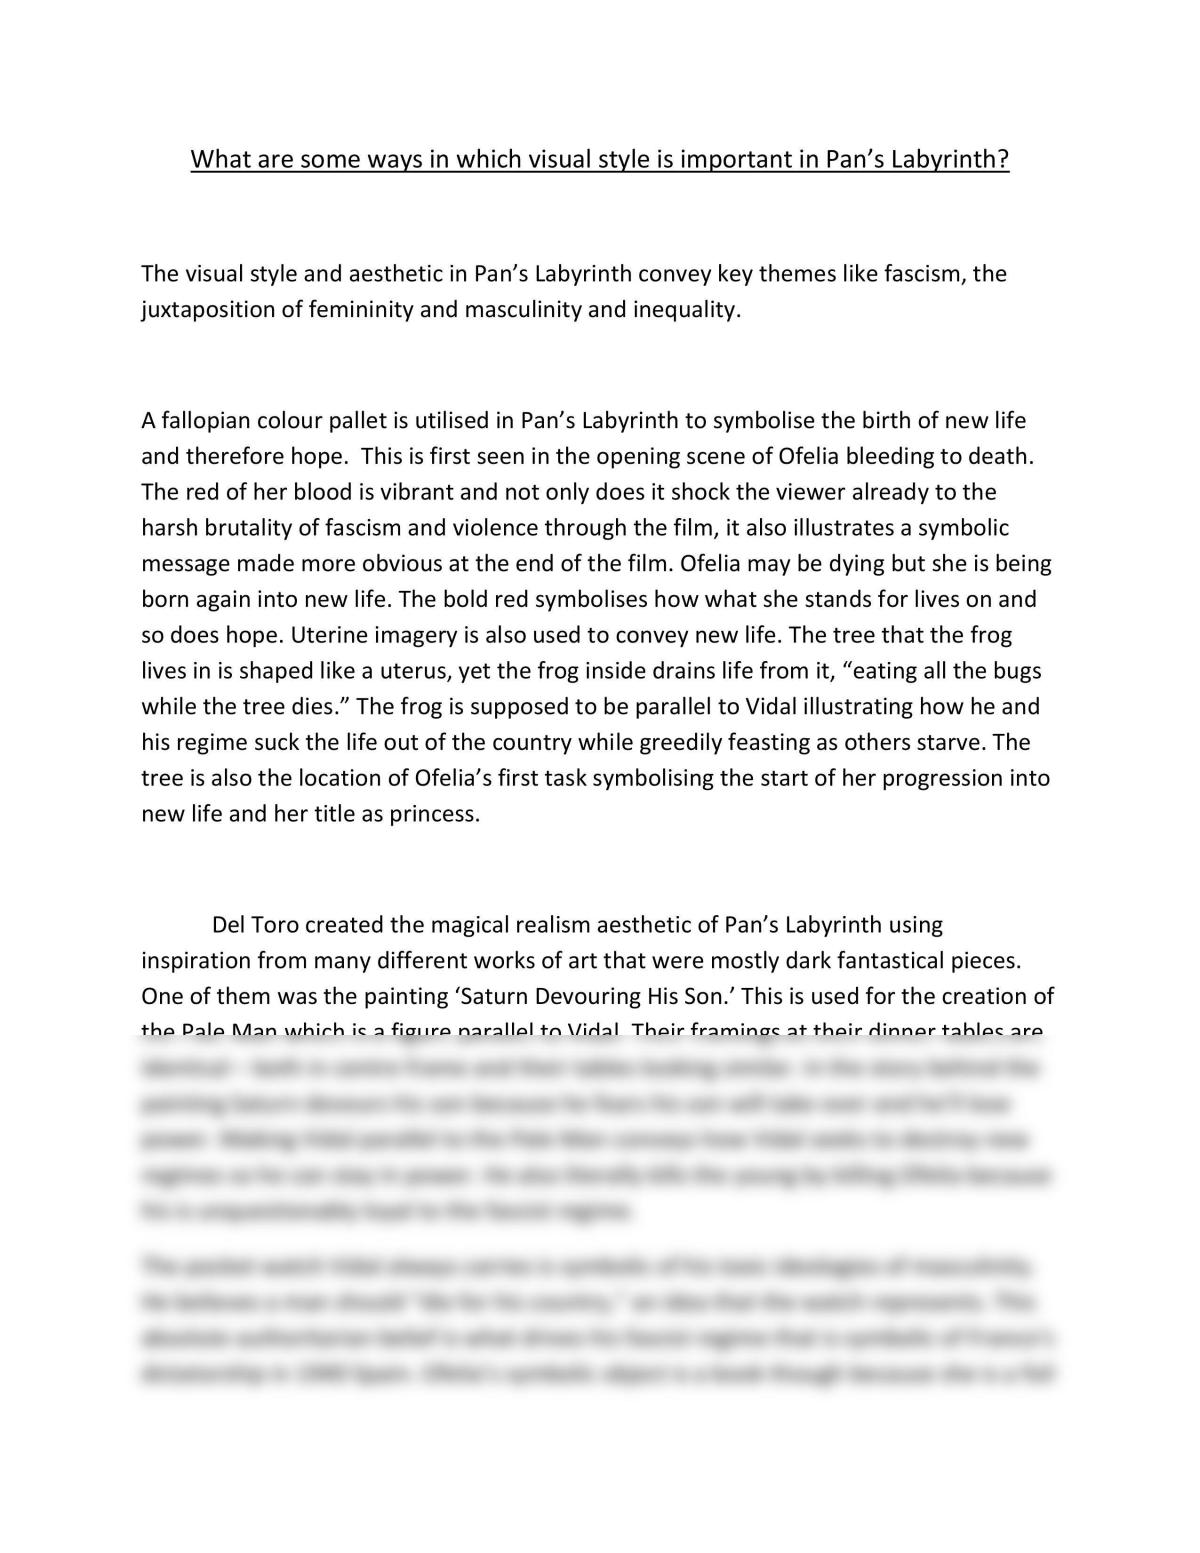 2 Essays on the visual styles in Pan's Labyrinth and City of God - Page 1